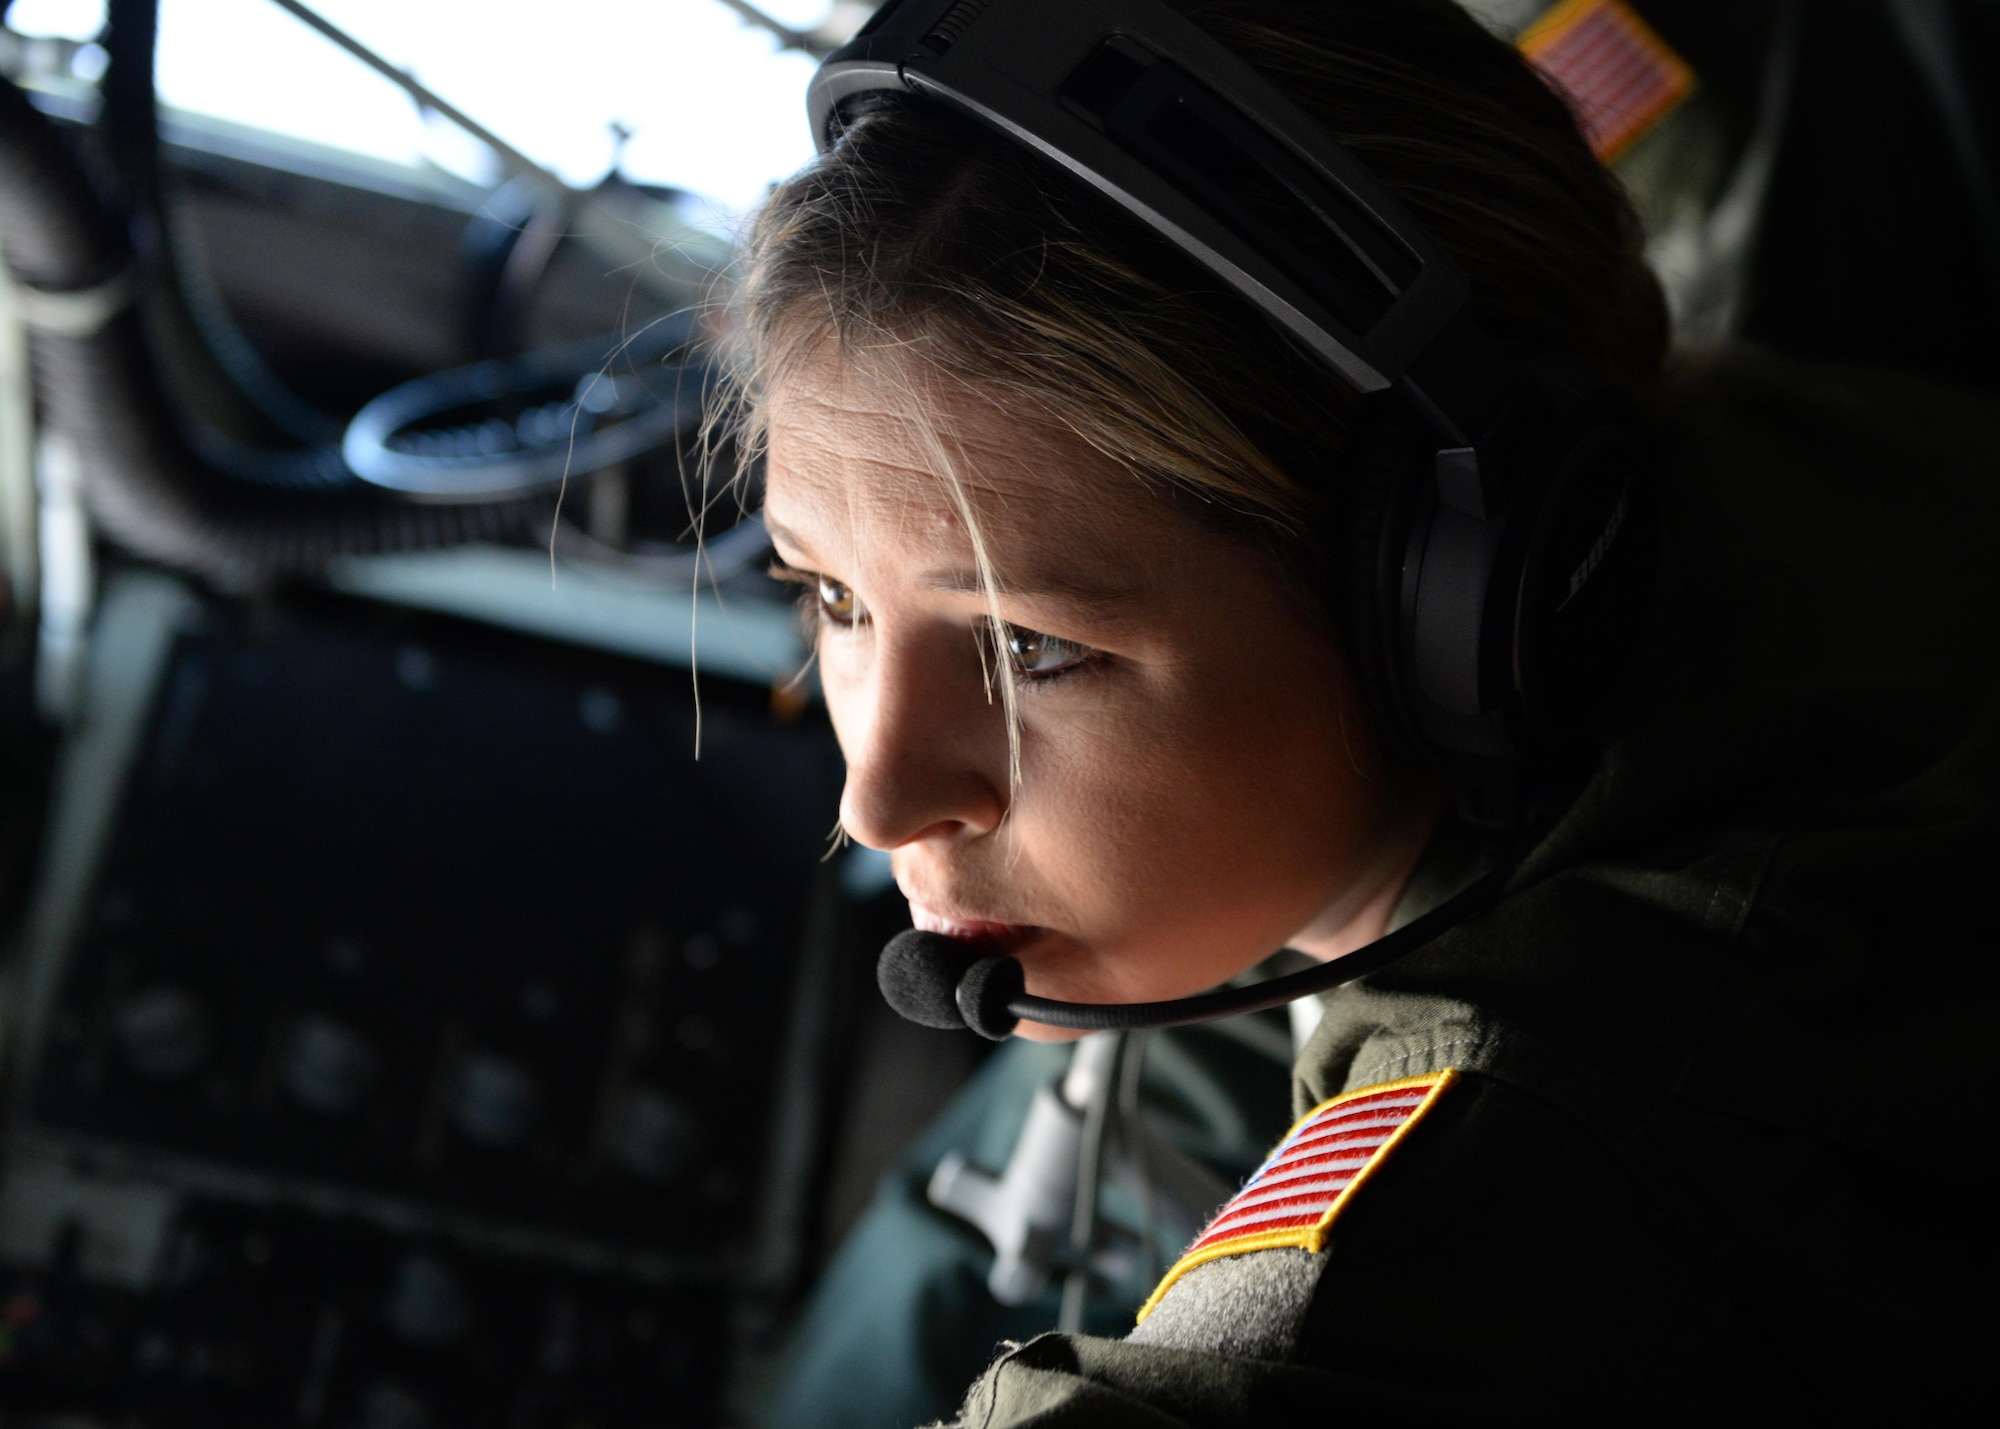 Staff Sgt. Amanda Walls, KC-135 Stratotanker boom operator student, runs through her pre-flight checklist on her final check ride, April 10, 2015. Boom operator students go through a four month course where they are given five flights and a final check ride to determine whether they’re ready to be a qualified boom operator. (U.S. Air Force photo/Airman 1st Class Nathan Clark)